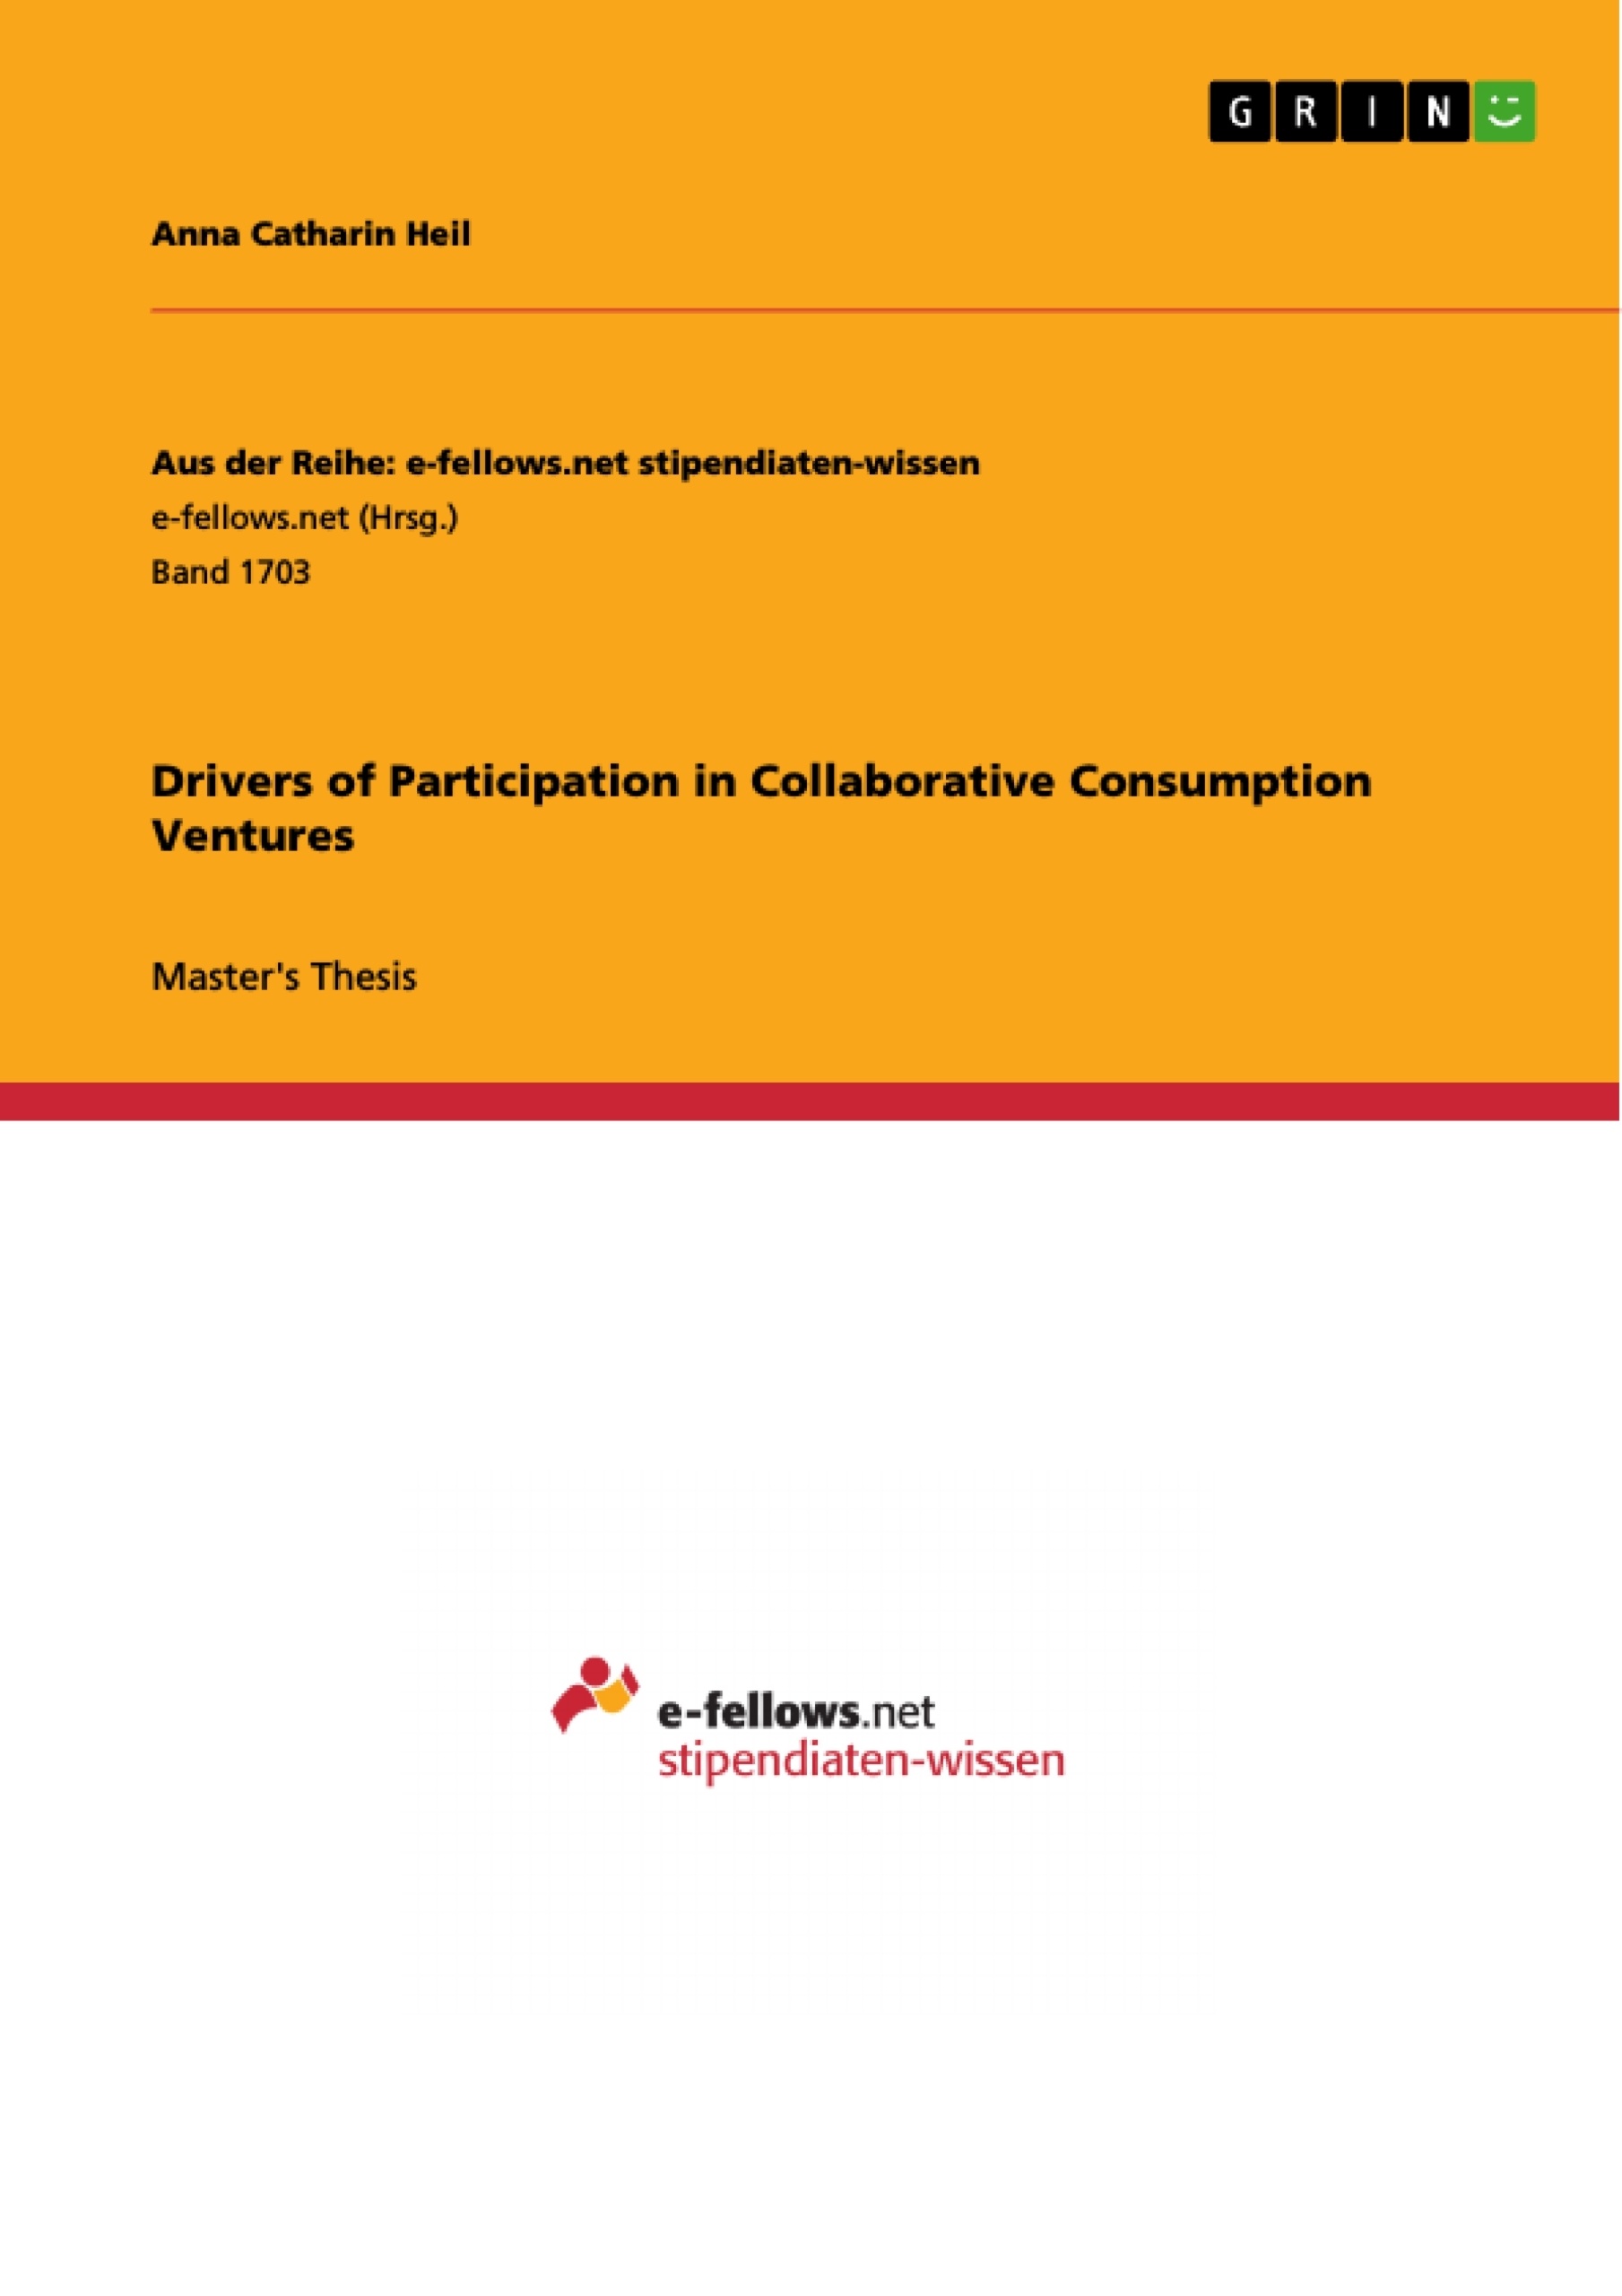 Title: Drivers of Participation in Collaborative Consumption Ventures